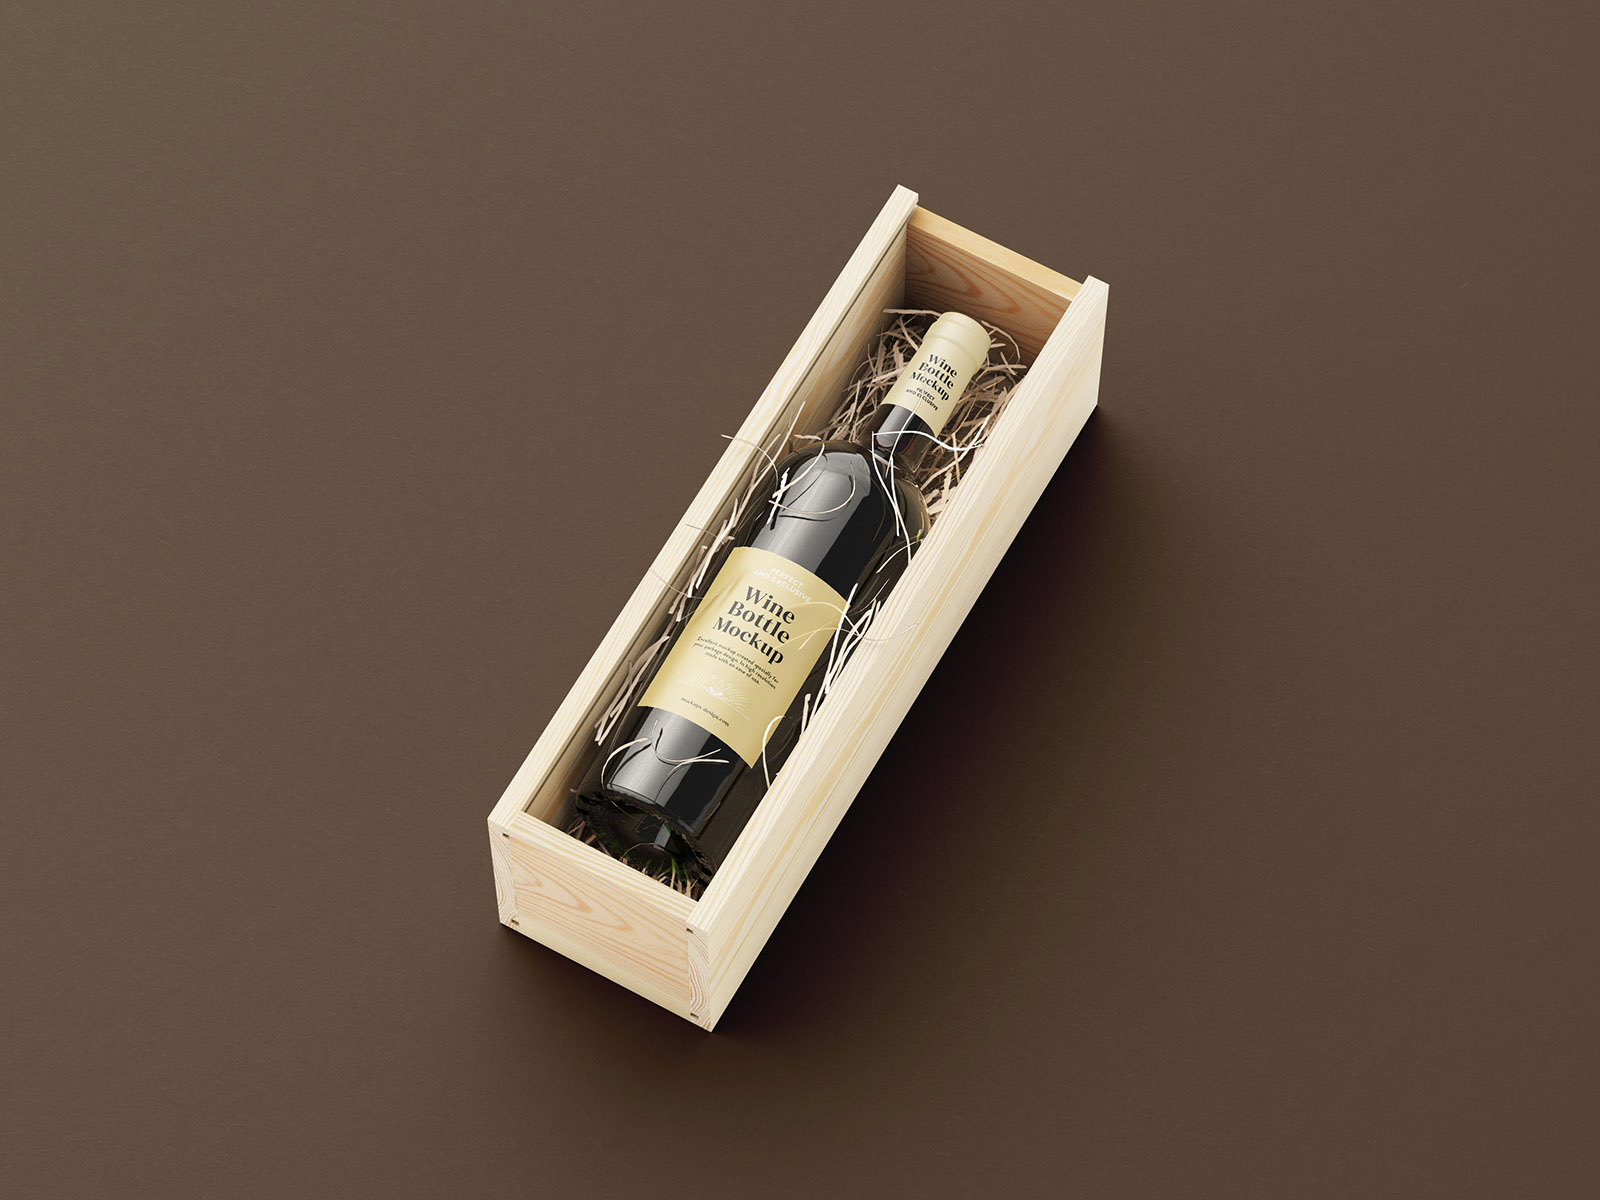 Opened wine box mockup with wooden craft